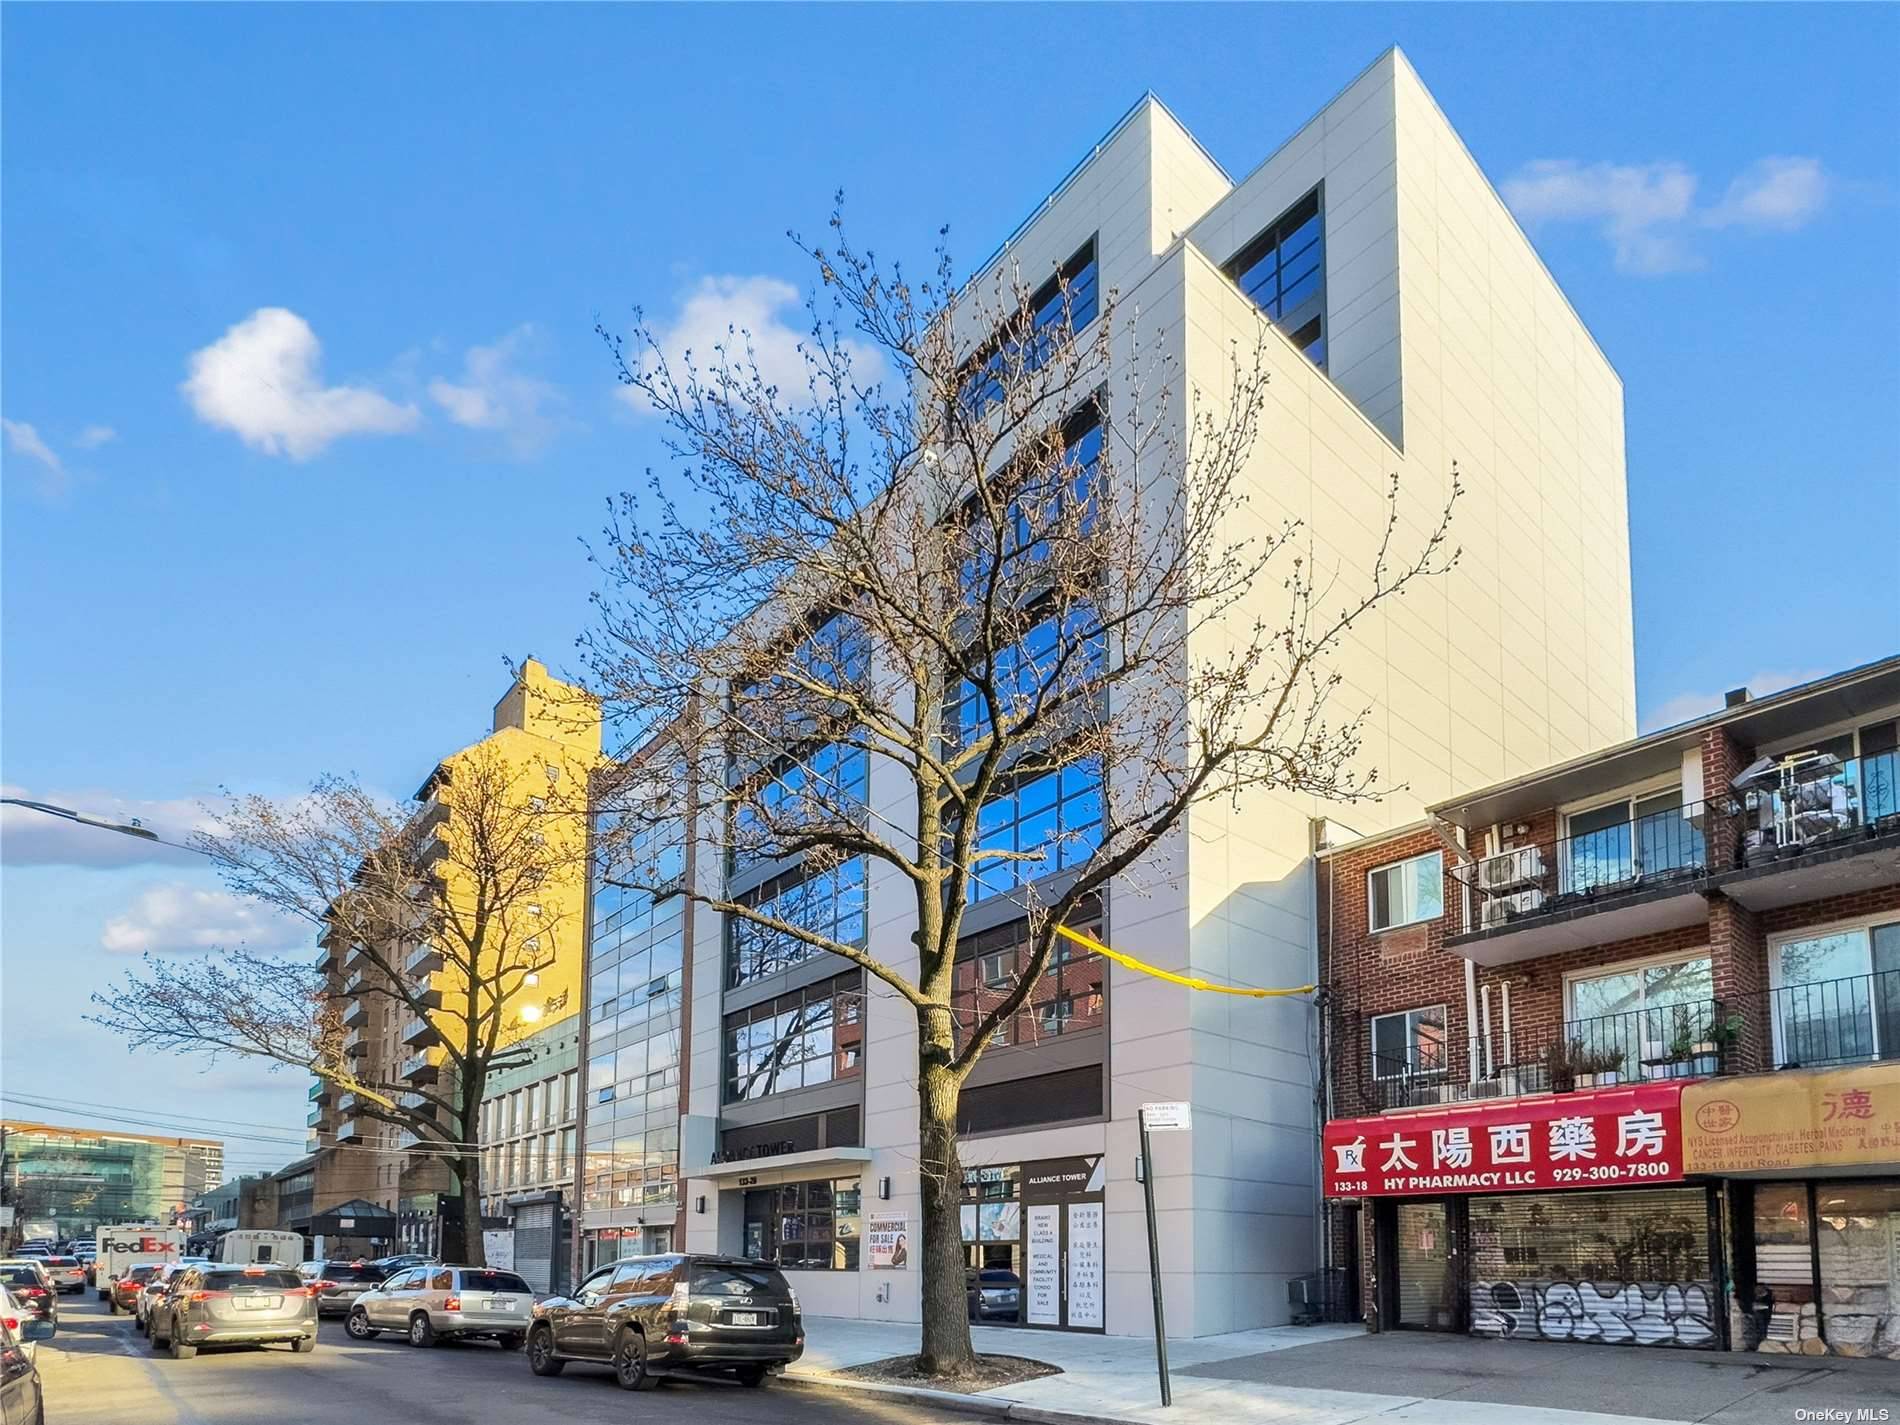 Elevate your business at Alliance Tower, a newly constructed eight story, Class A office building located in the vibrant heart of Flushing with a 25 year ICAP tax abatement.